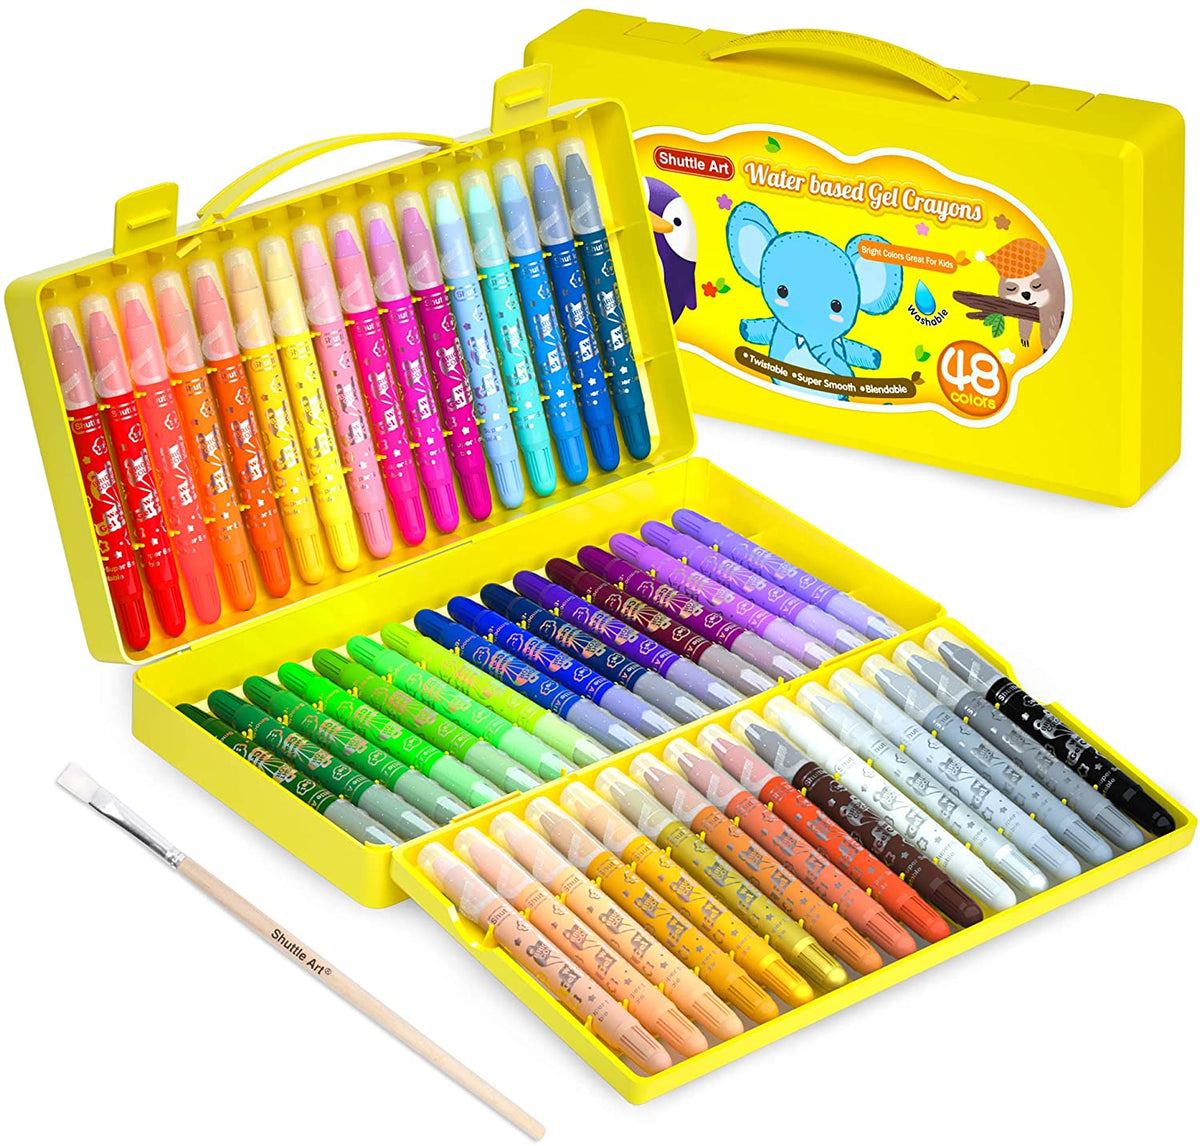 Shuttle Art 24 Colors Gel Crayons for Toddlers, Non-Toxic Twistable Crayons  Set for Kids Children Coloring, Crayon-Pastel-Watercolor Effect, Ideal for